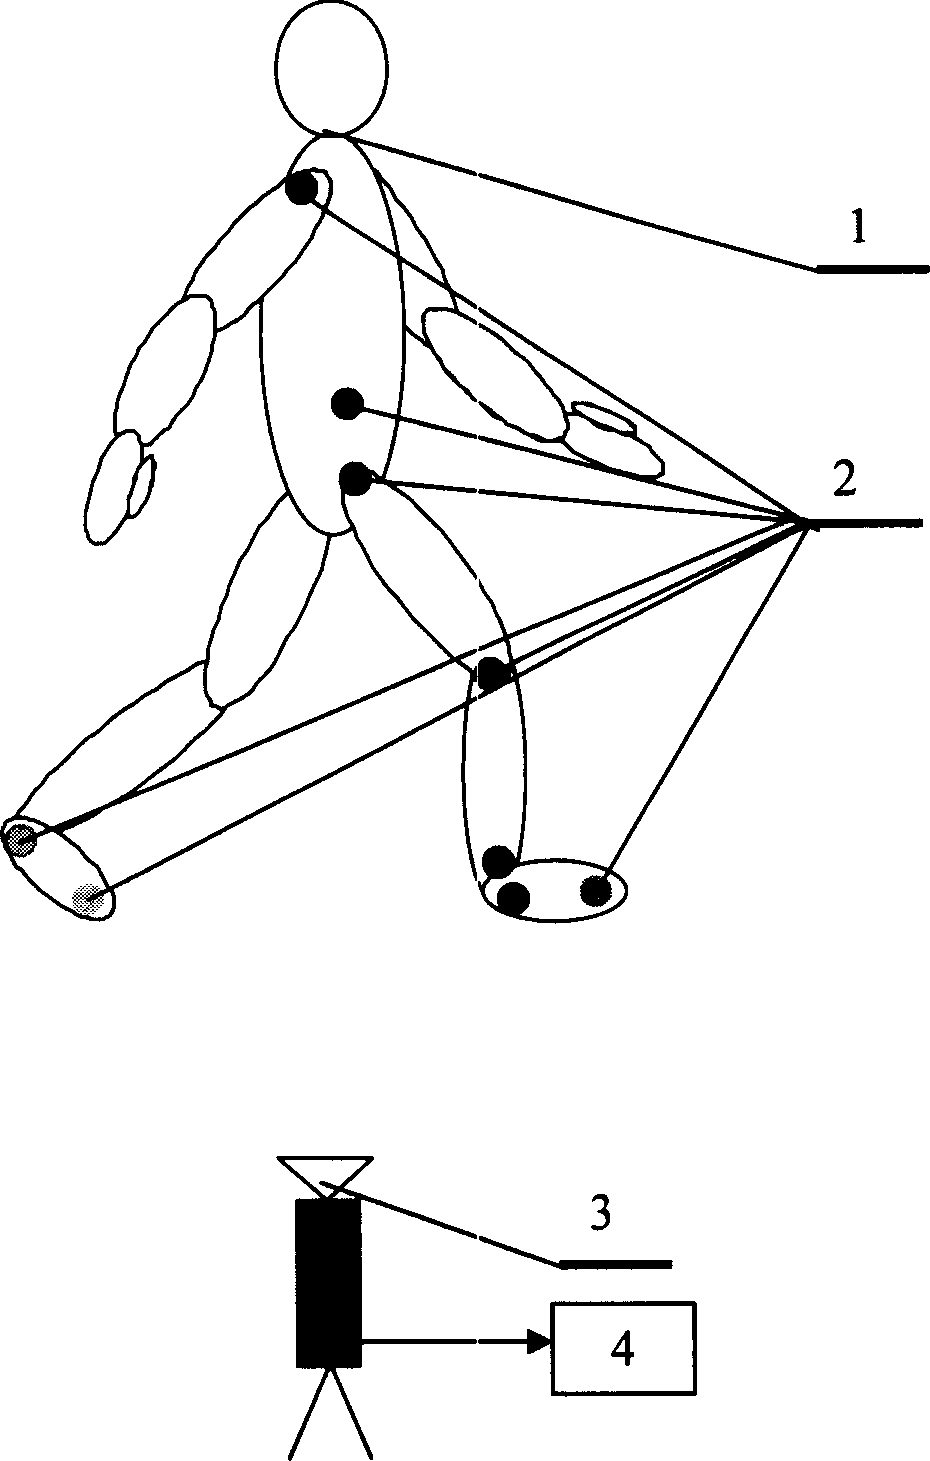 Method for determining trace of human movement